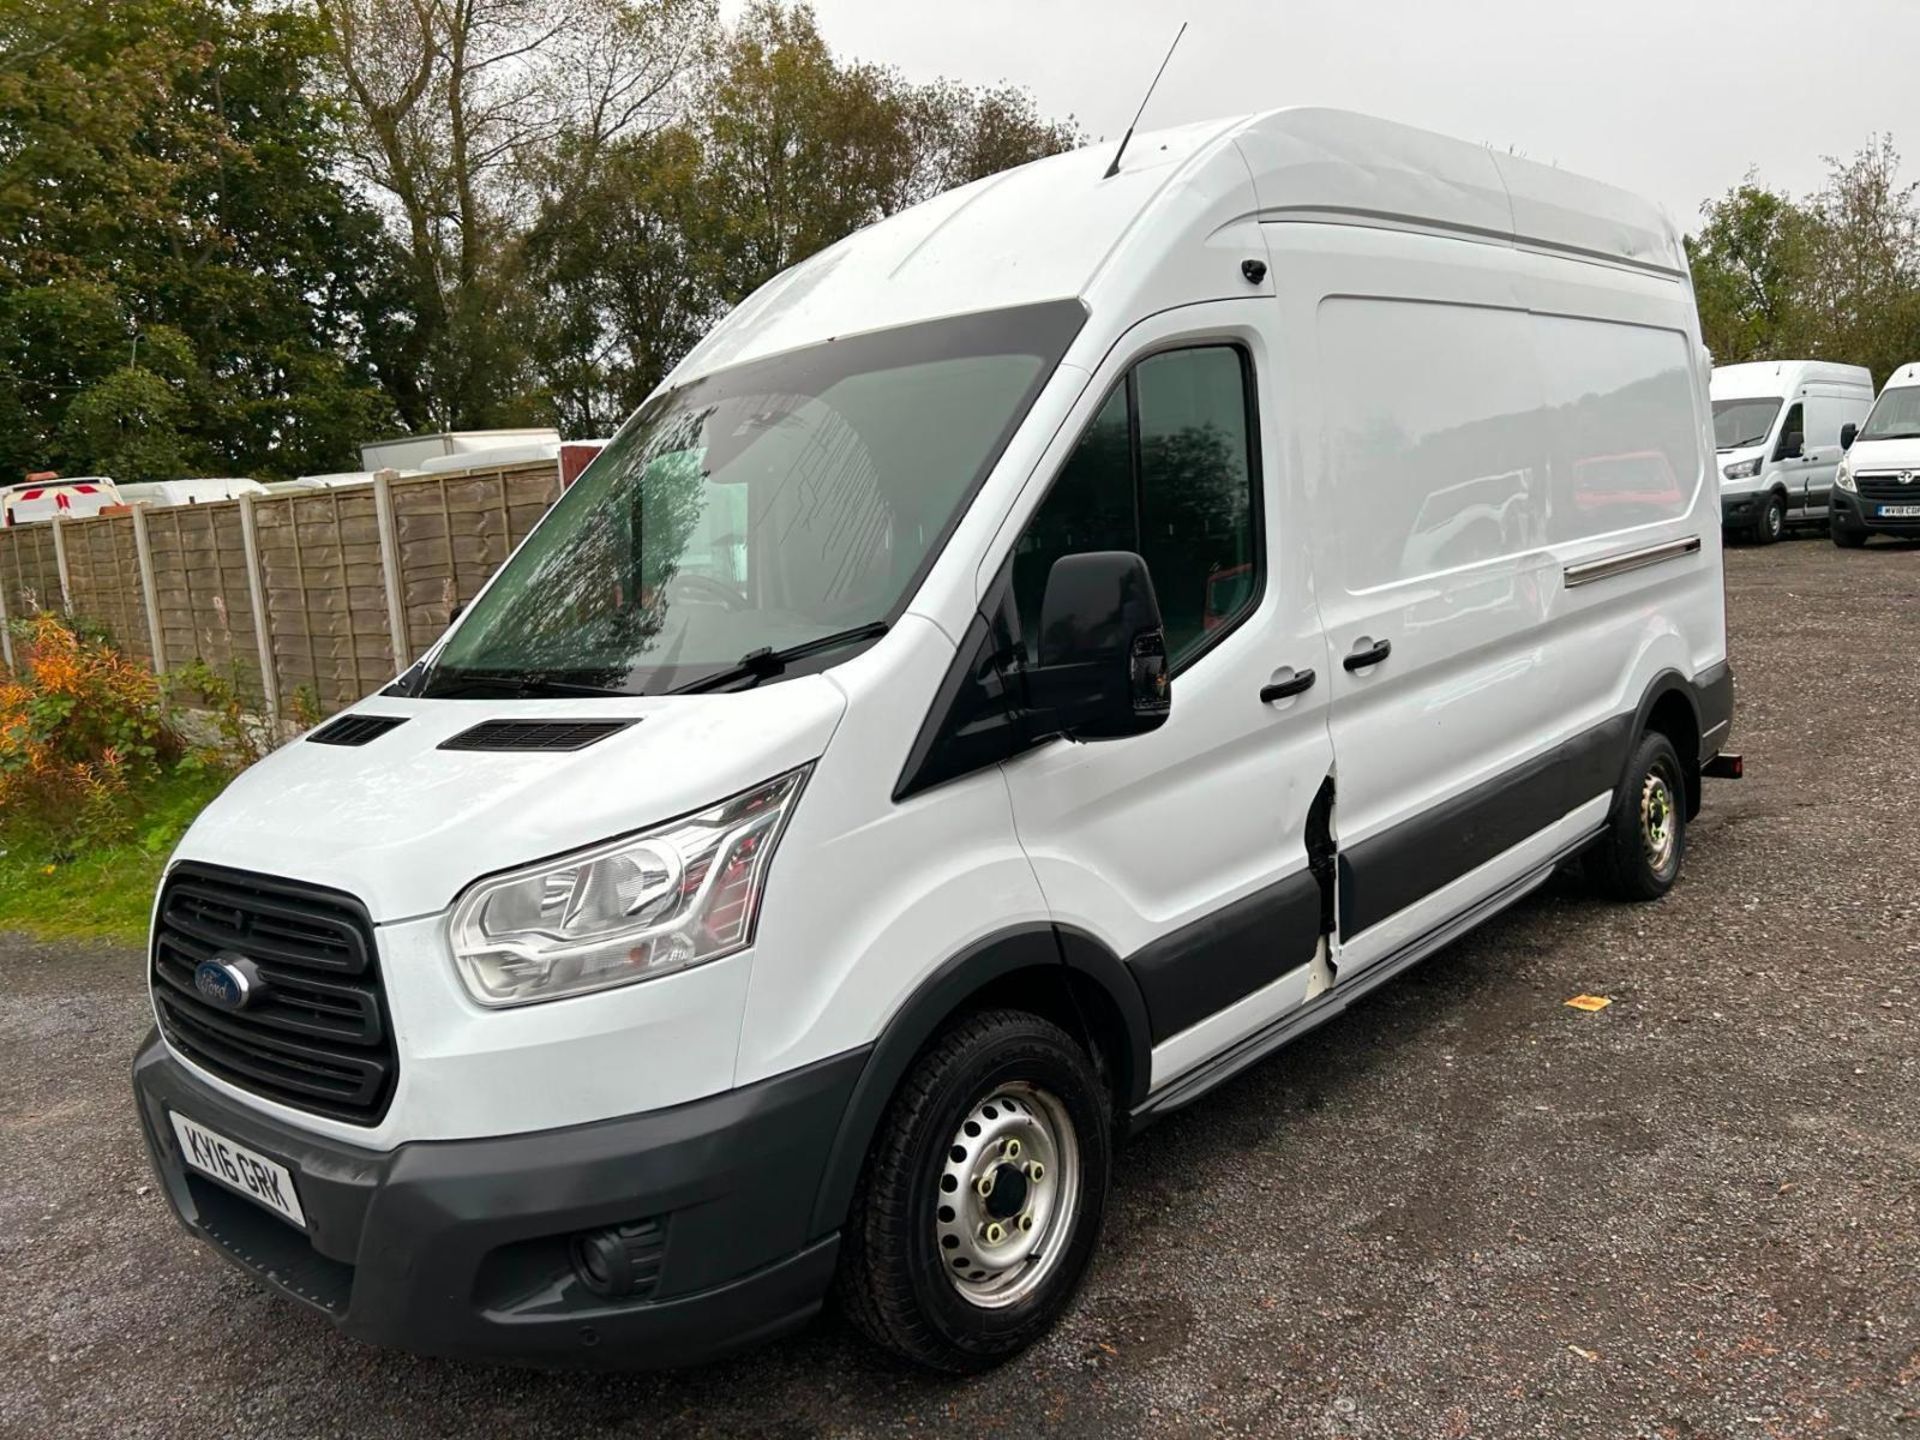 DURABLE WORKHORSE: 2016 FORD TRANSIT 2.2 TDCI L3 H3 - Image 9 of 12